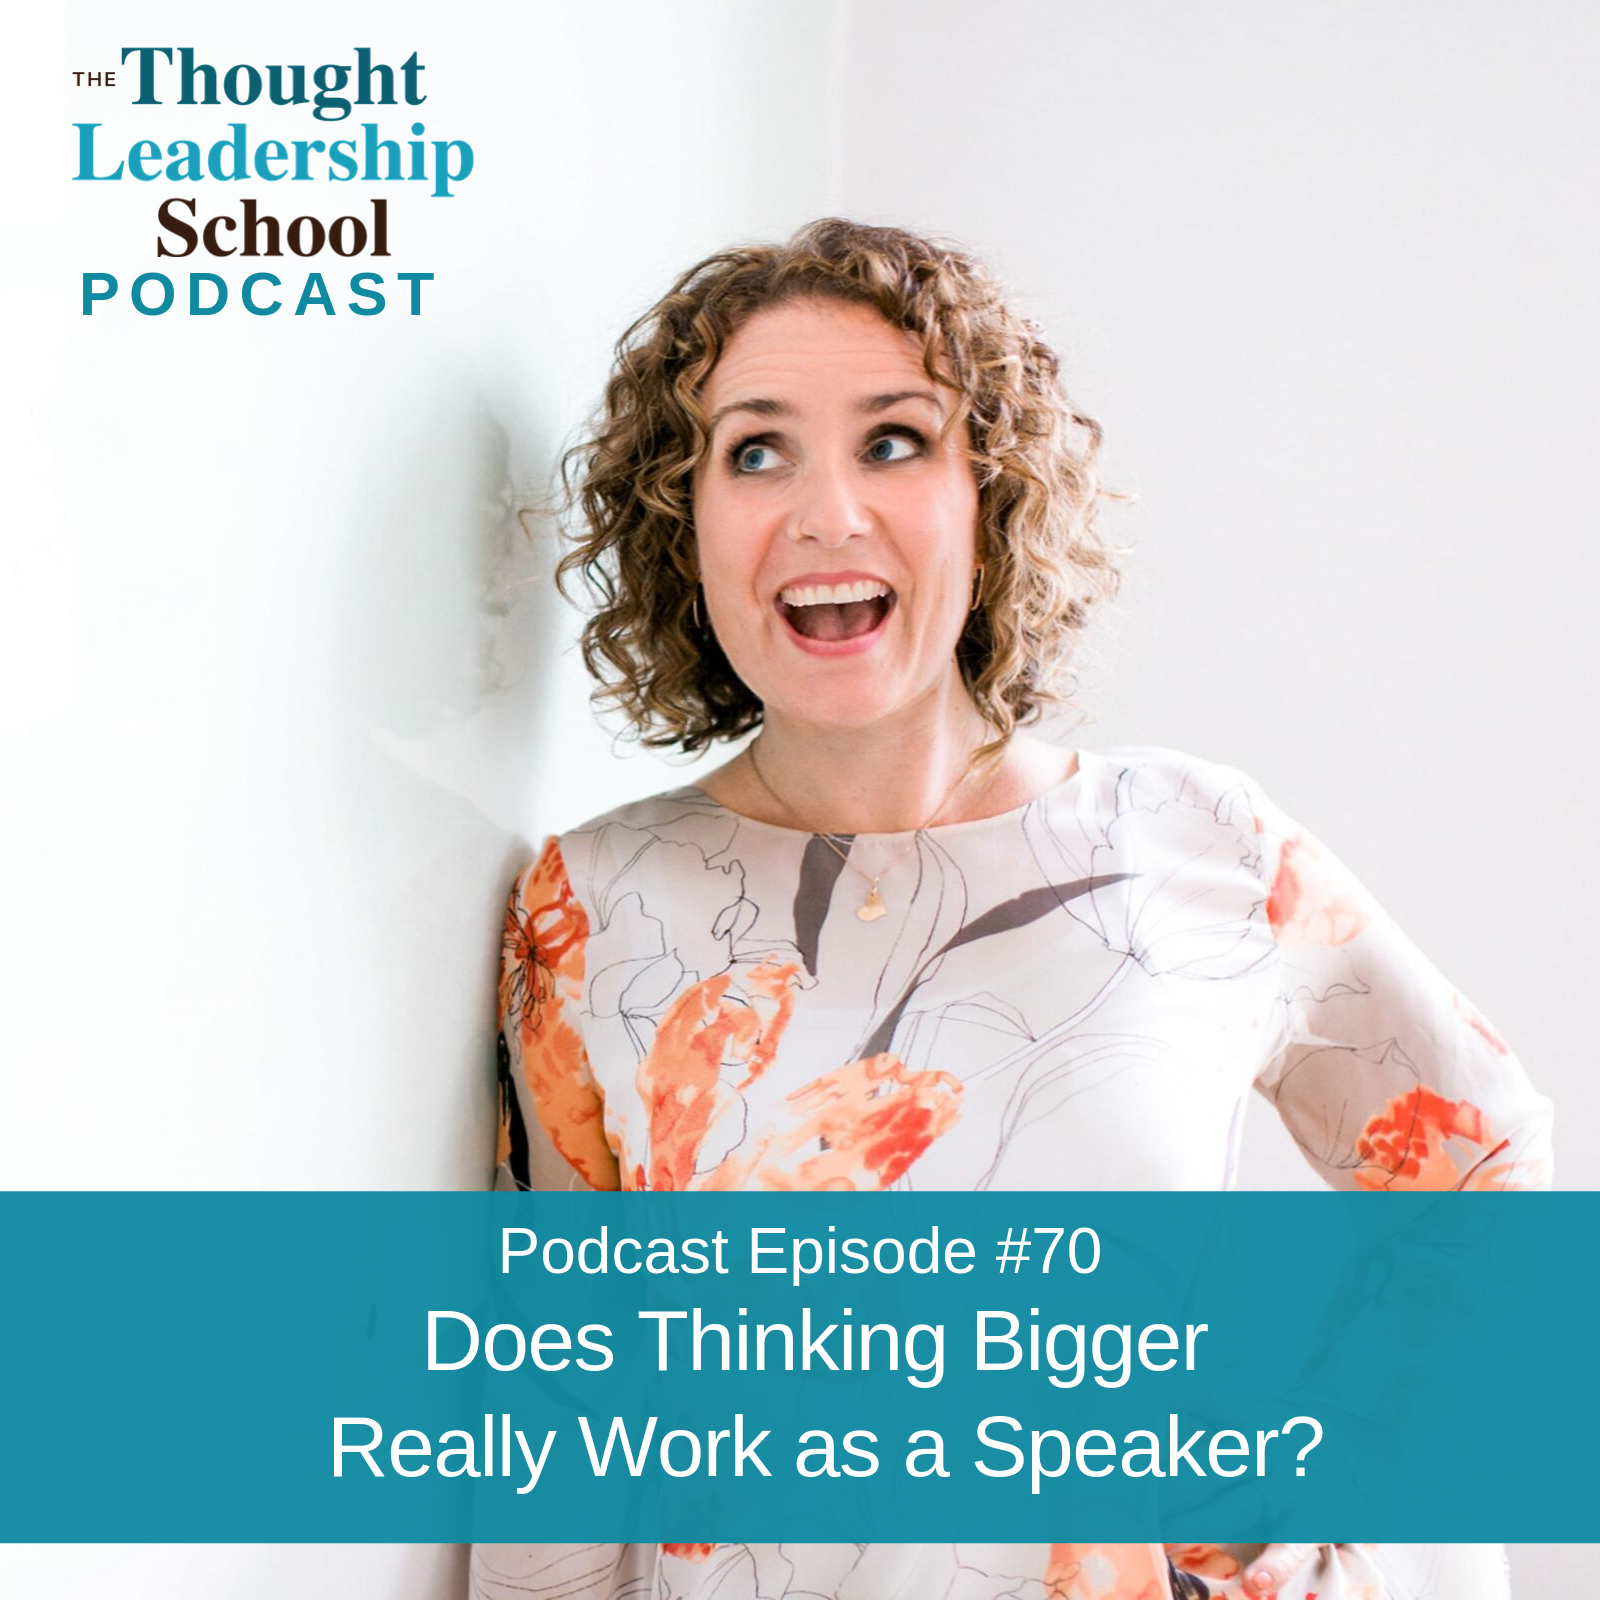 Ep #70: Does Thinking Bigger Really Work as a Speaker?